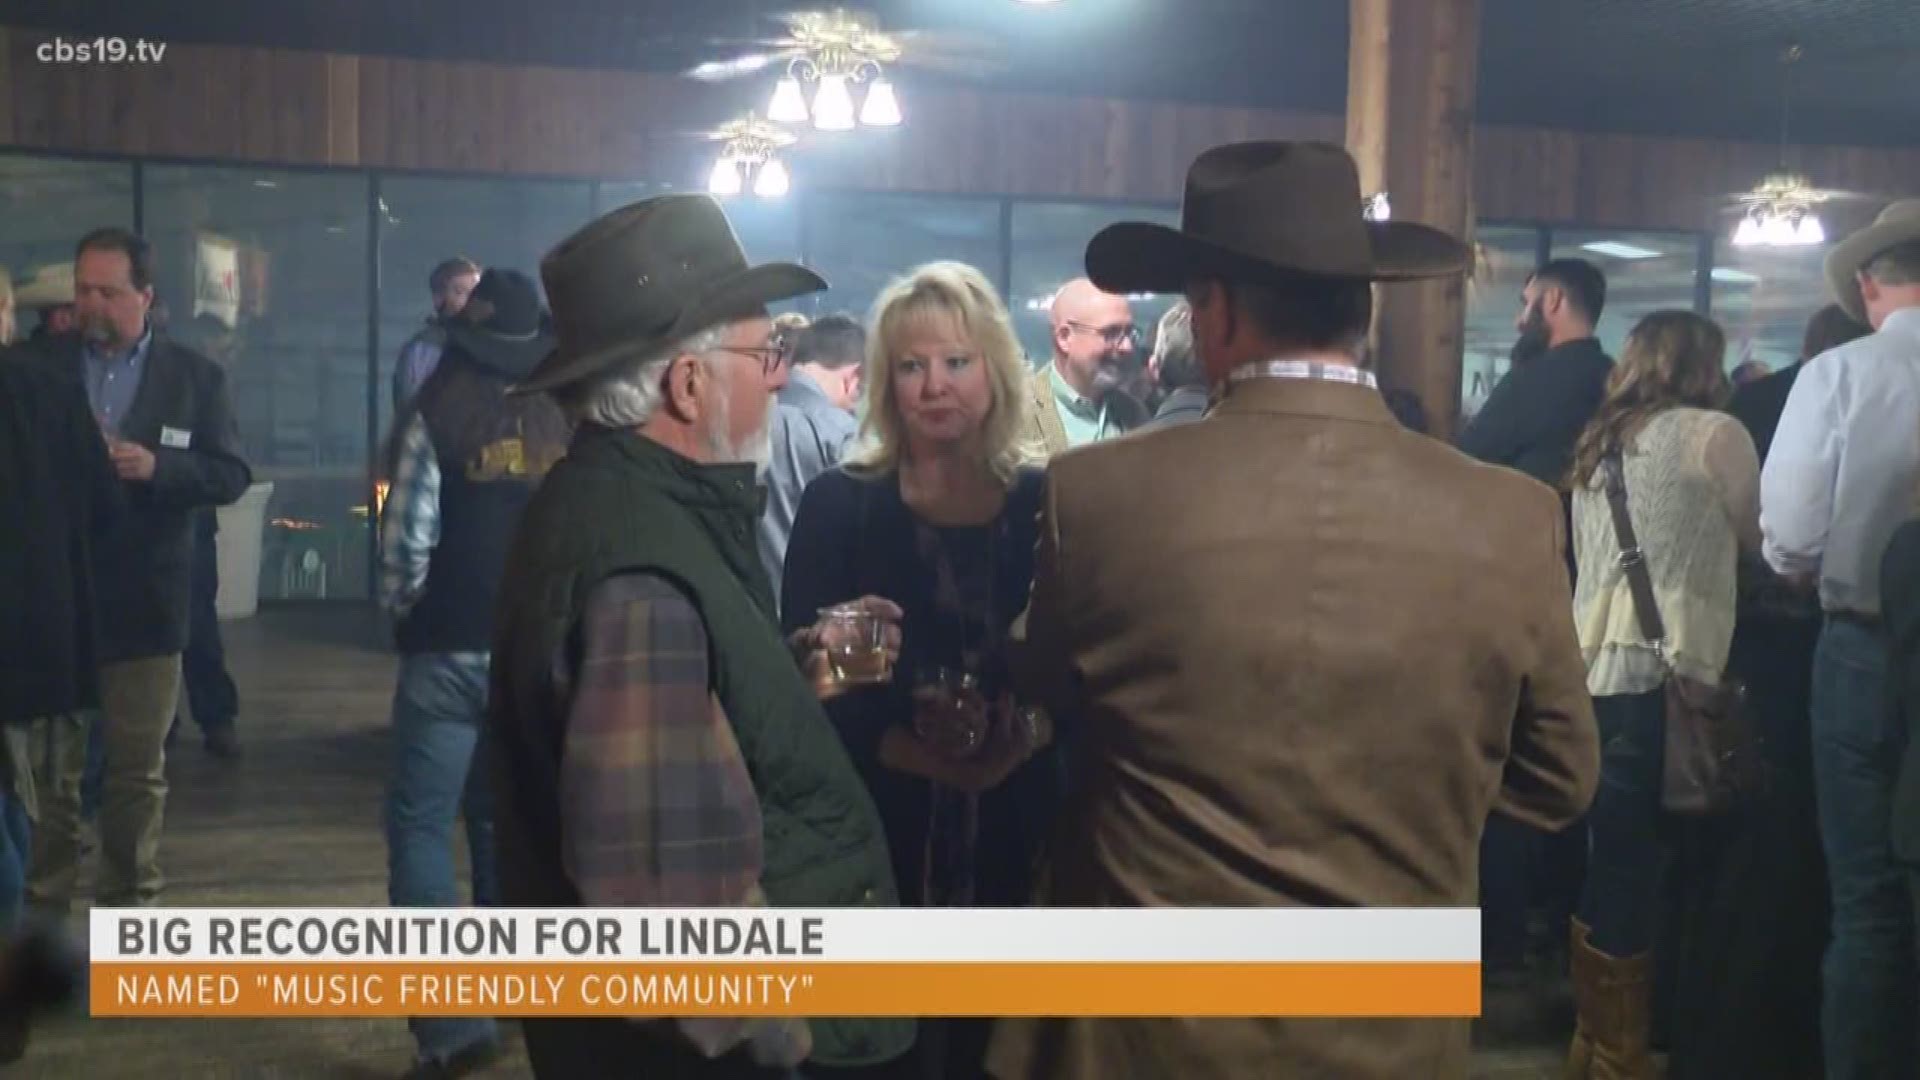 Lindale is prepping for a celebration when they will officially be named a Texas Music Friendly Community.